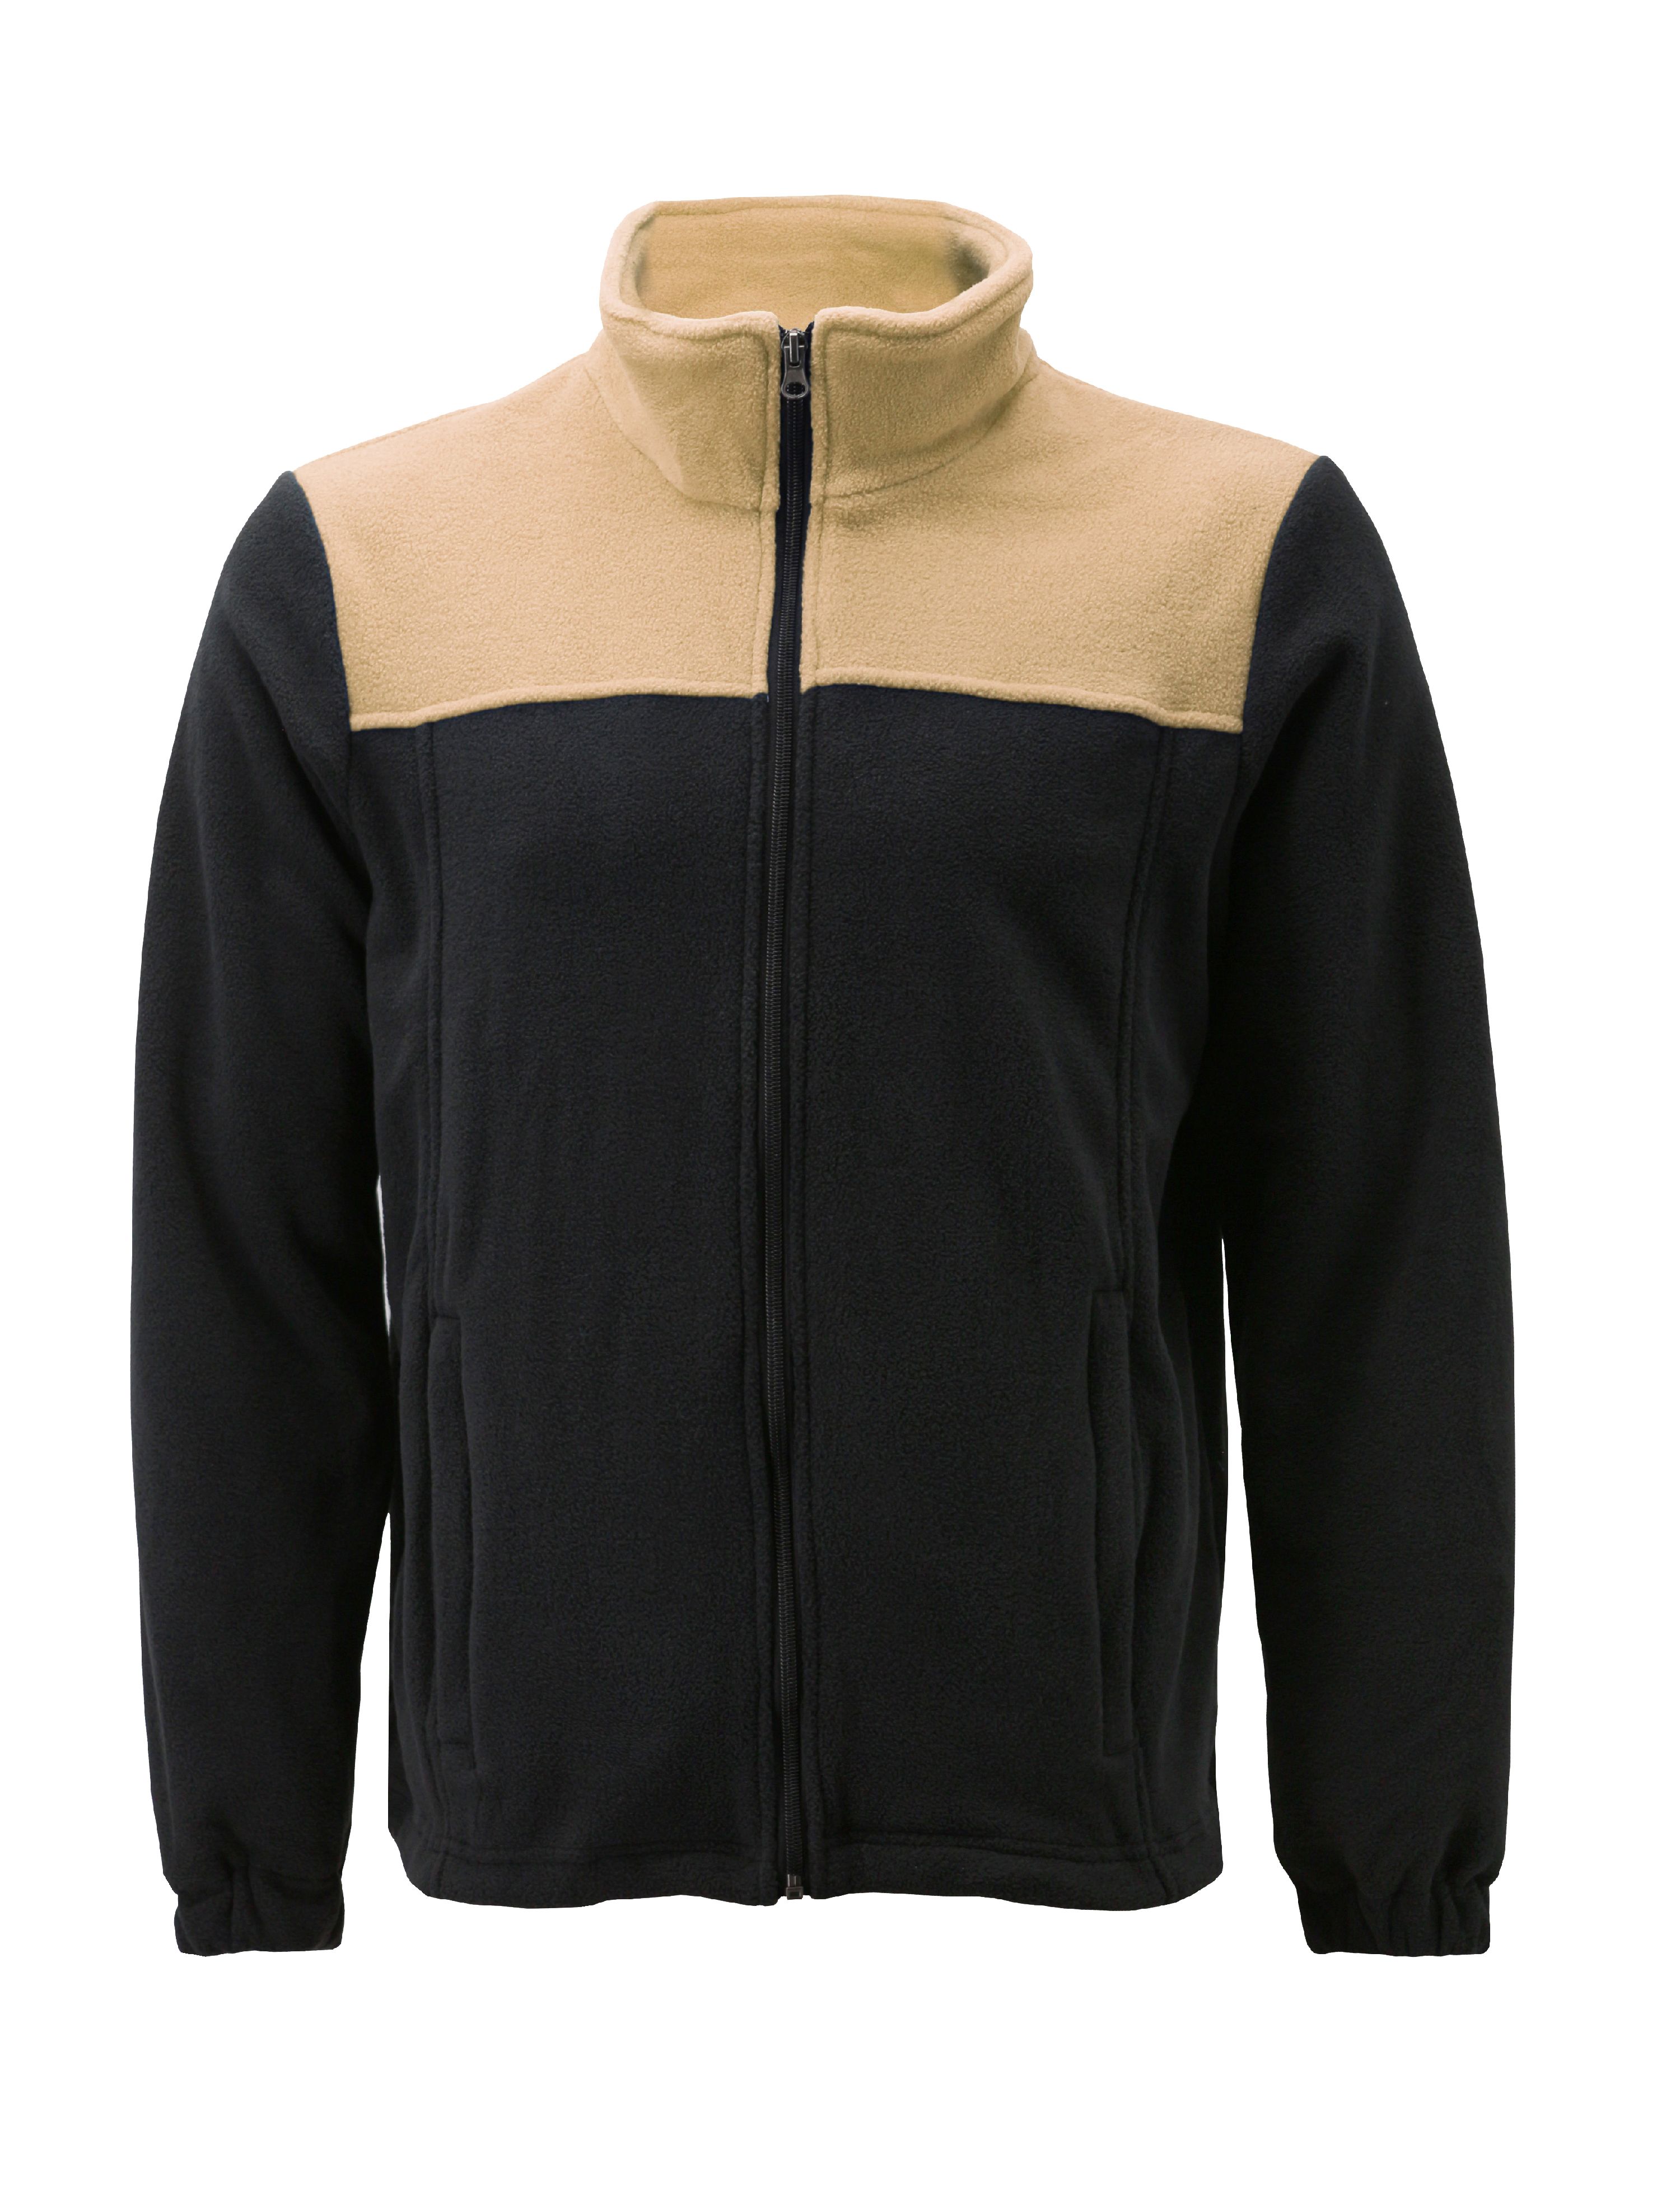 Men's Full Zip-Up Two Tone Solid Warm Polar Fleece Soft Collared Sweater Jacket (L, LF35 #3) - image 1 of 1